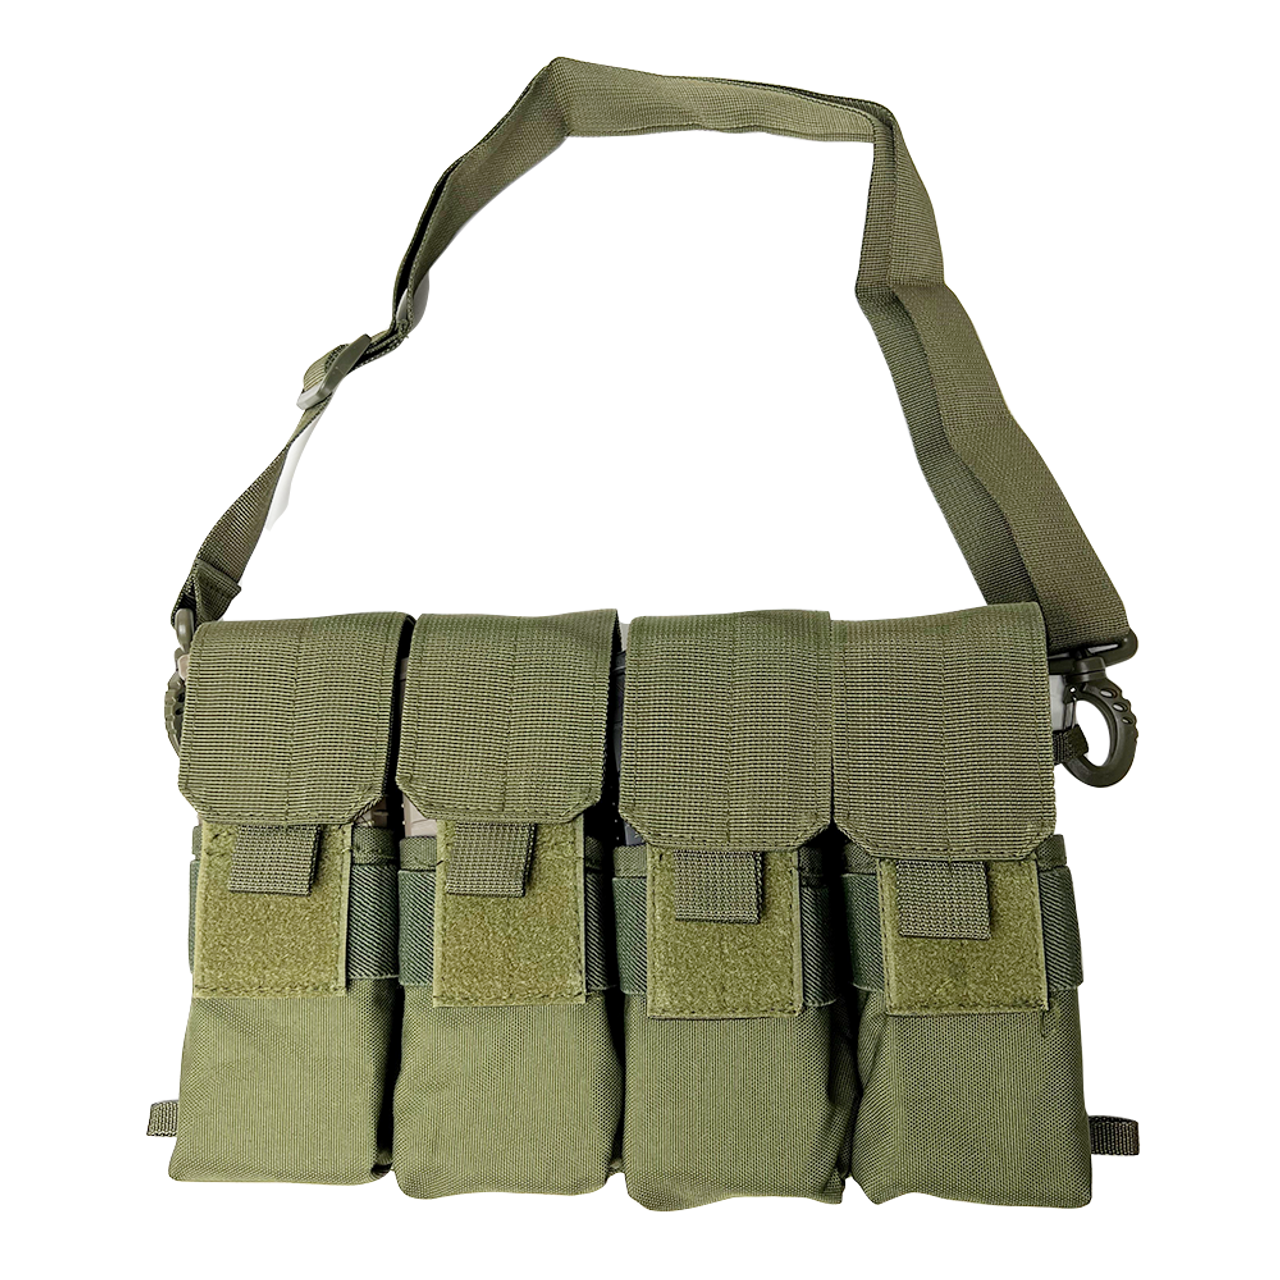 NcSTAR CVMARC3044G 223/556 Mag Carrier and Pouch Holds 8 30 Round Magazines